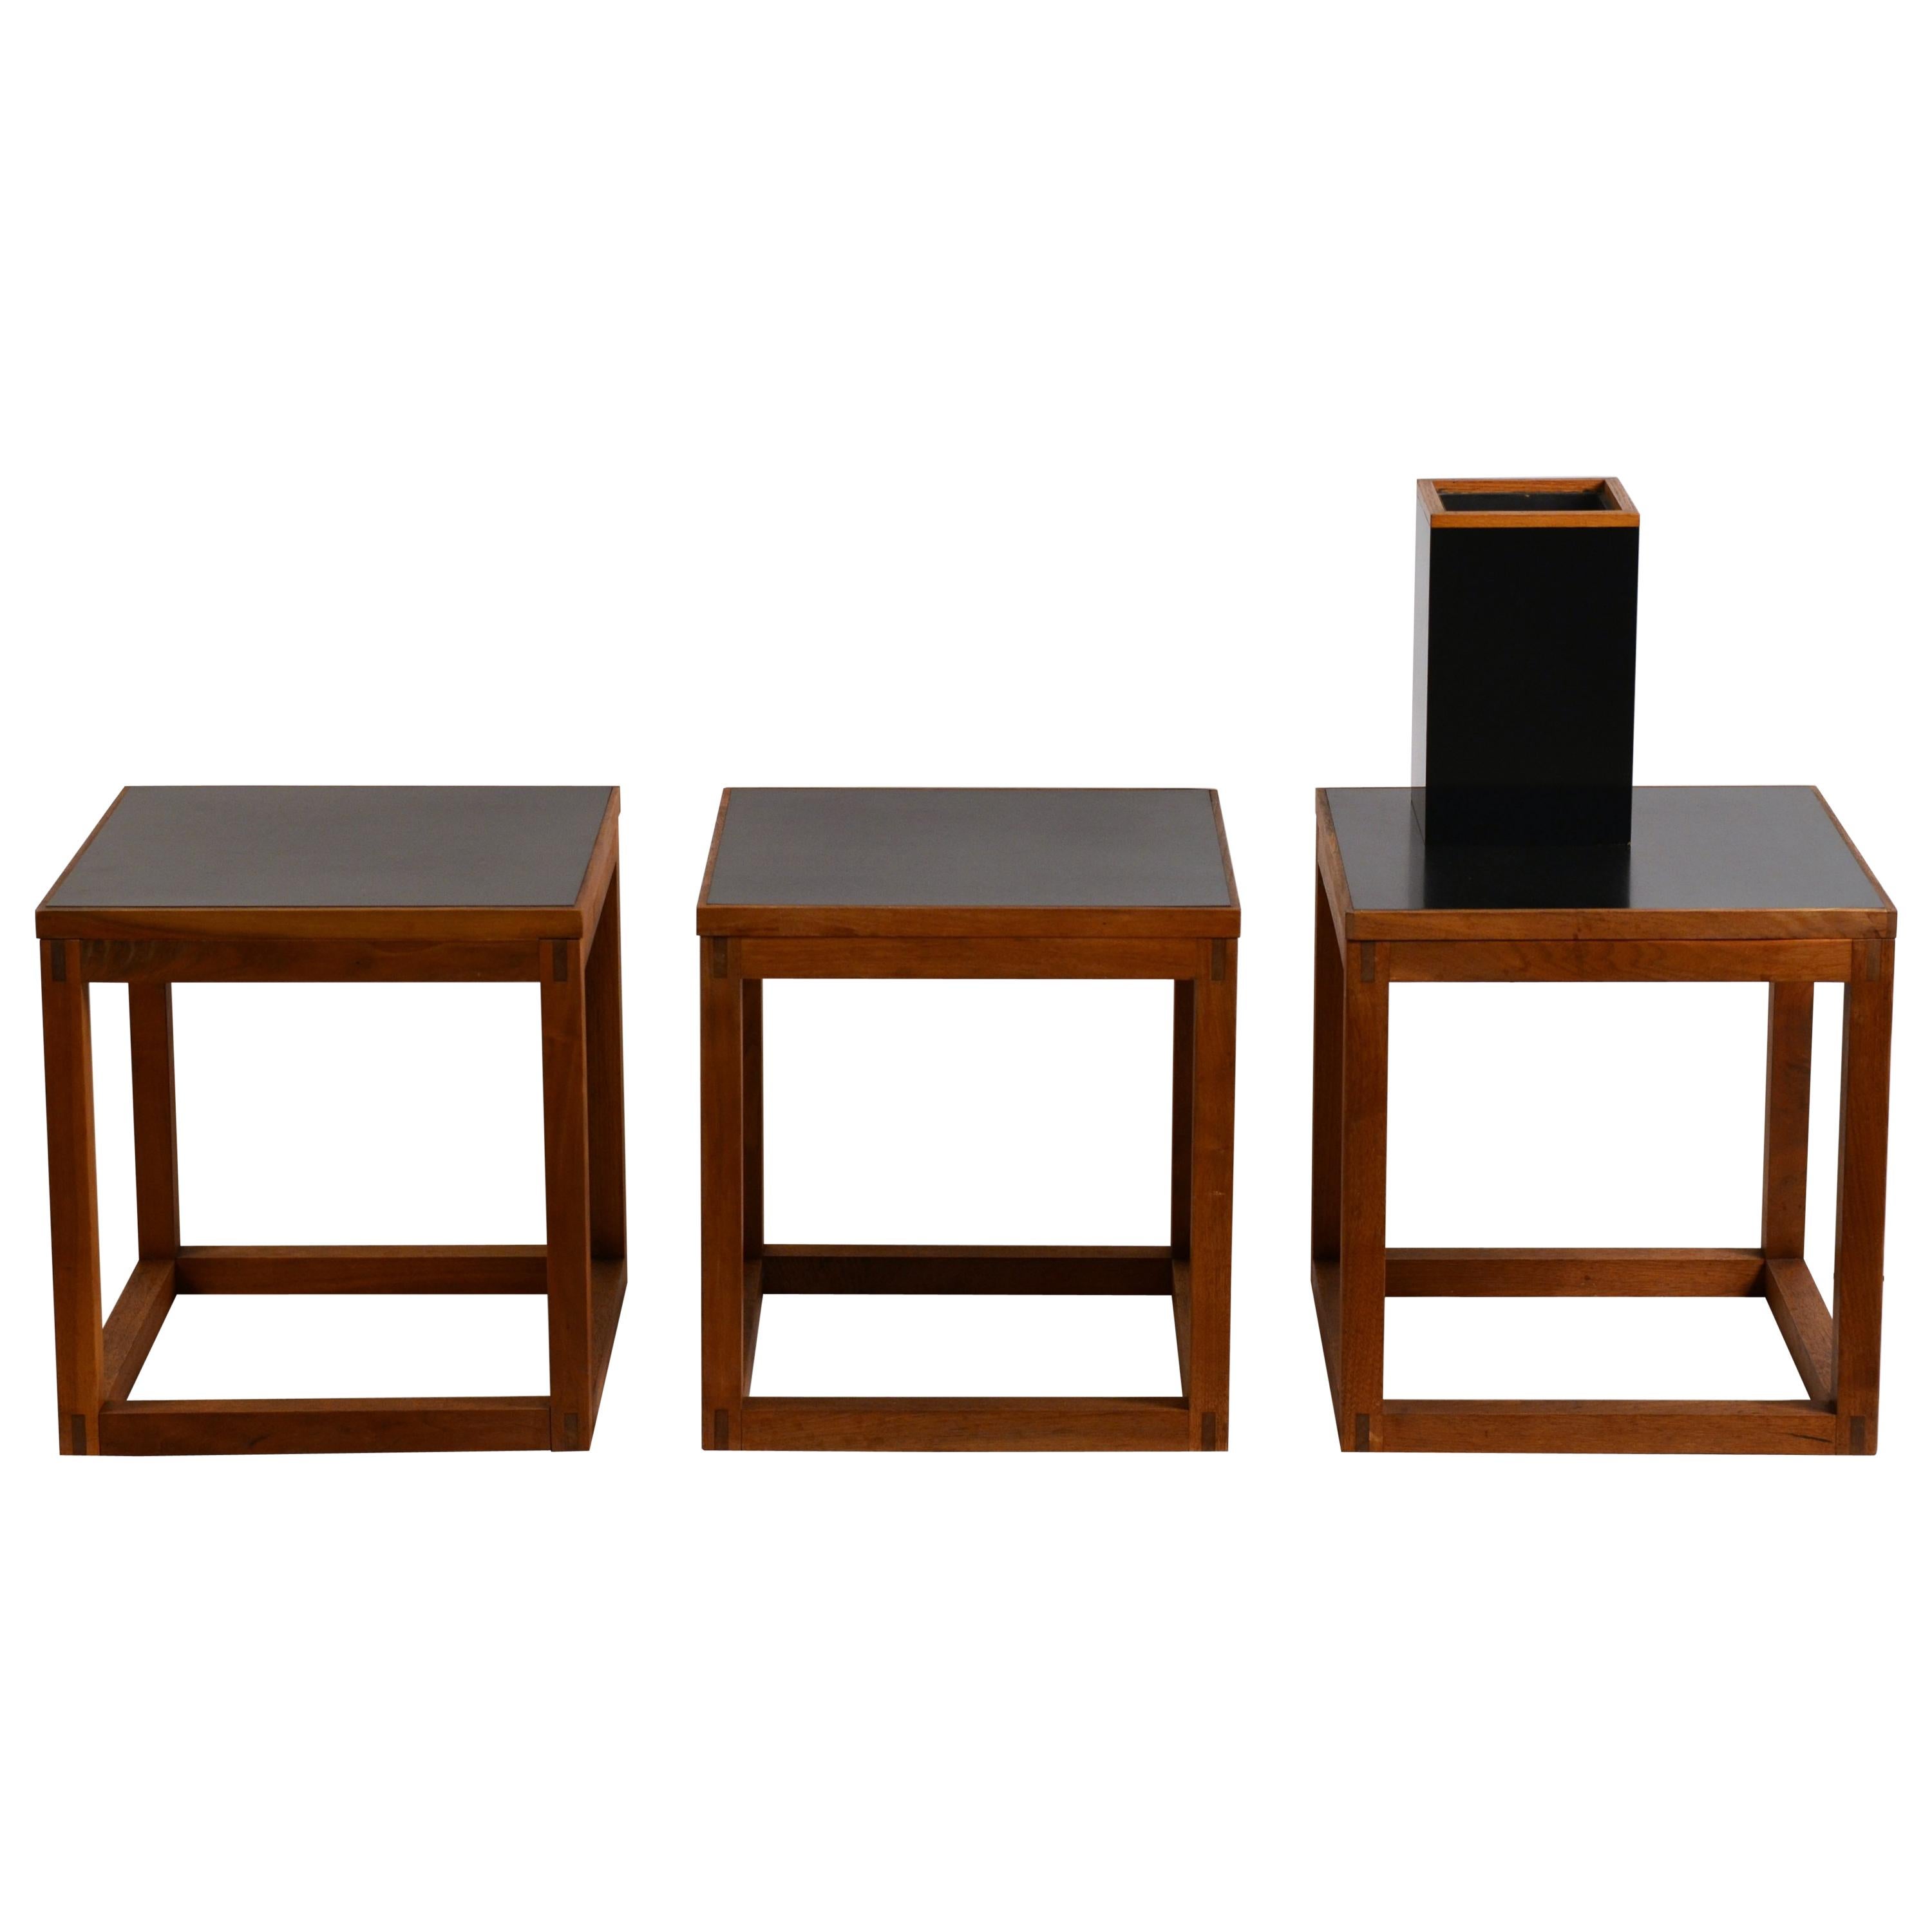 Set of 3 Minimal Teak and Laminate Cube Coffee table or Side Tables For Sale